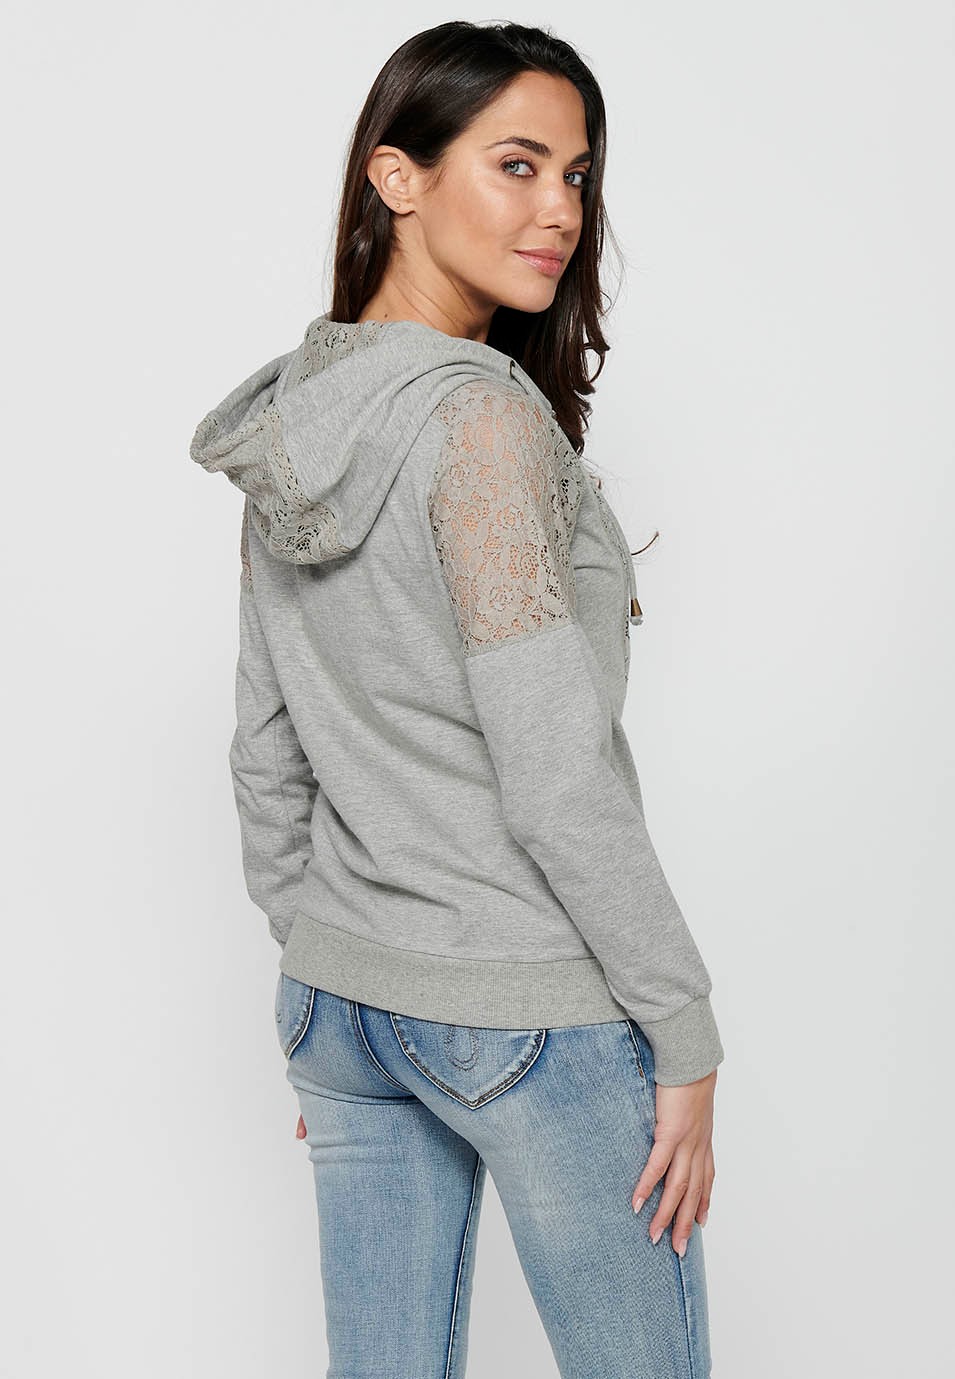 Sweatshirt jacket with zipper front closure and lace details with gray hooded collar for women 8